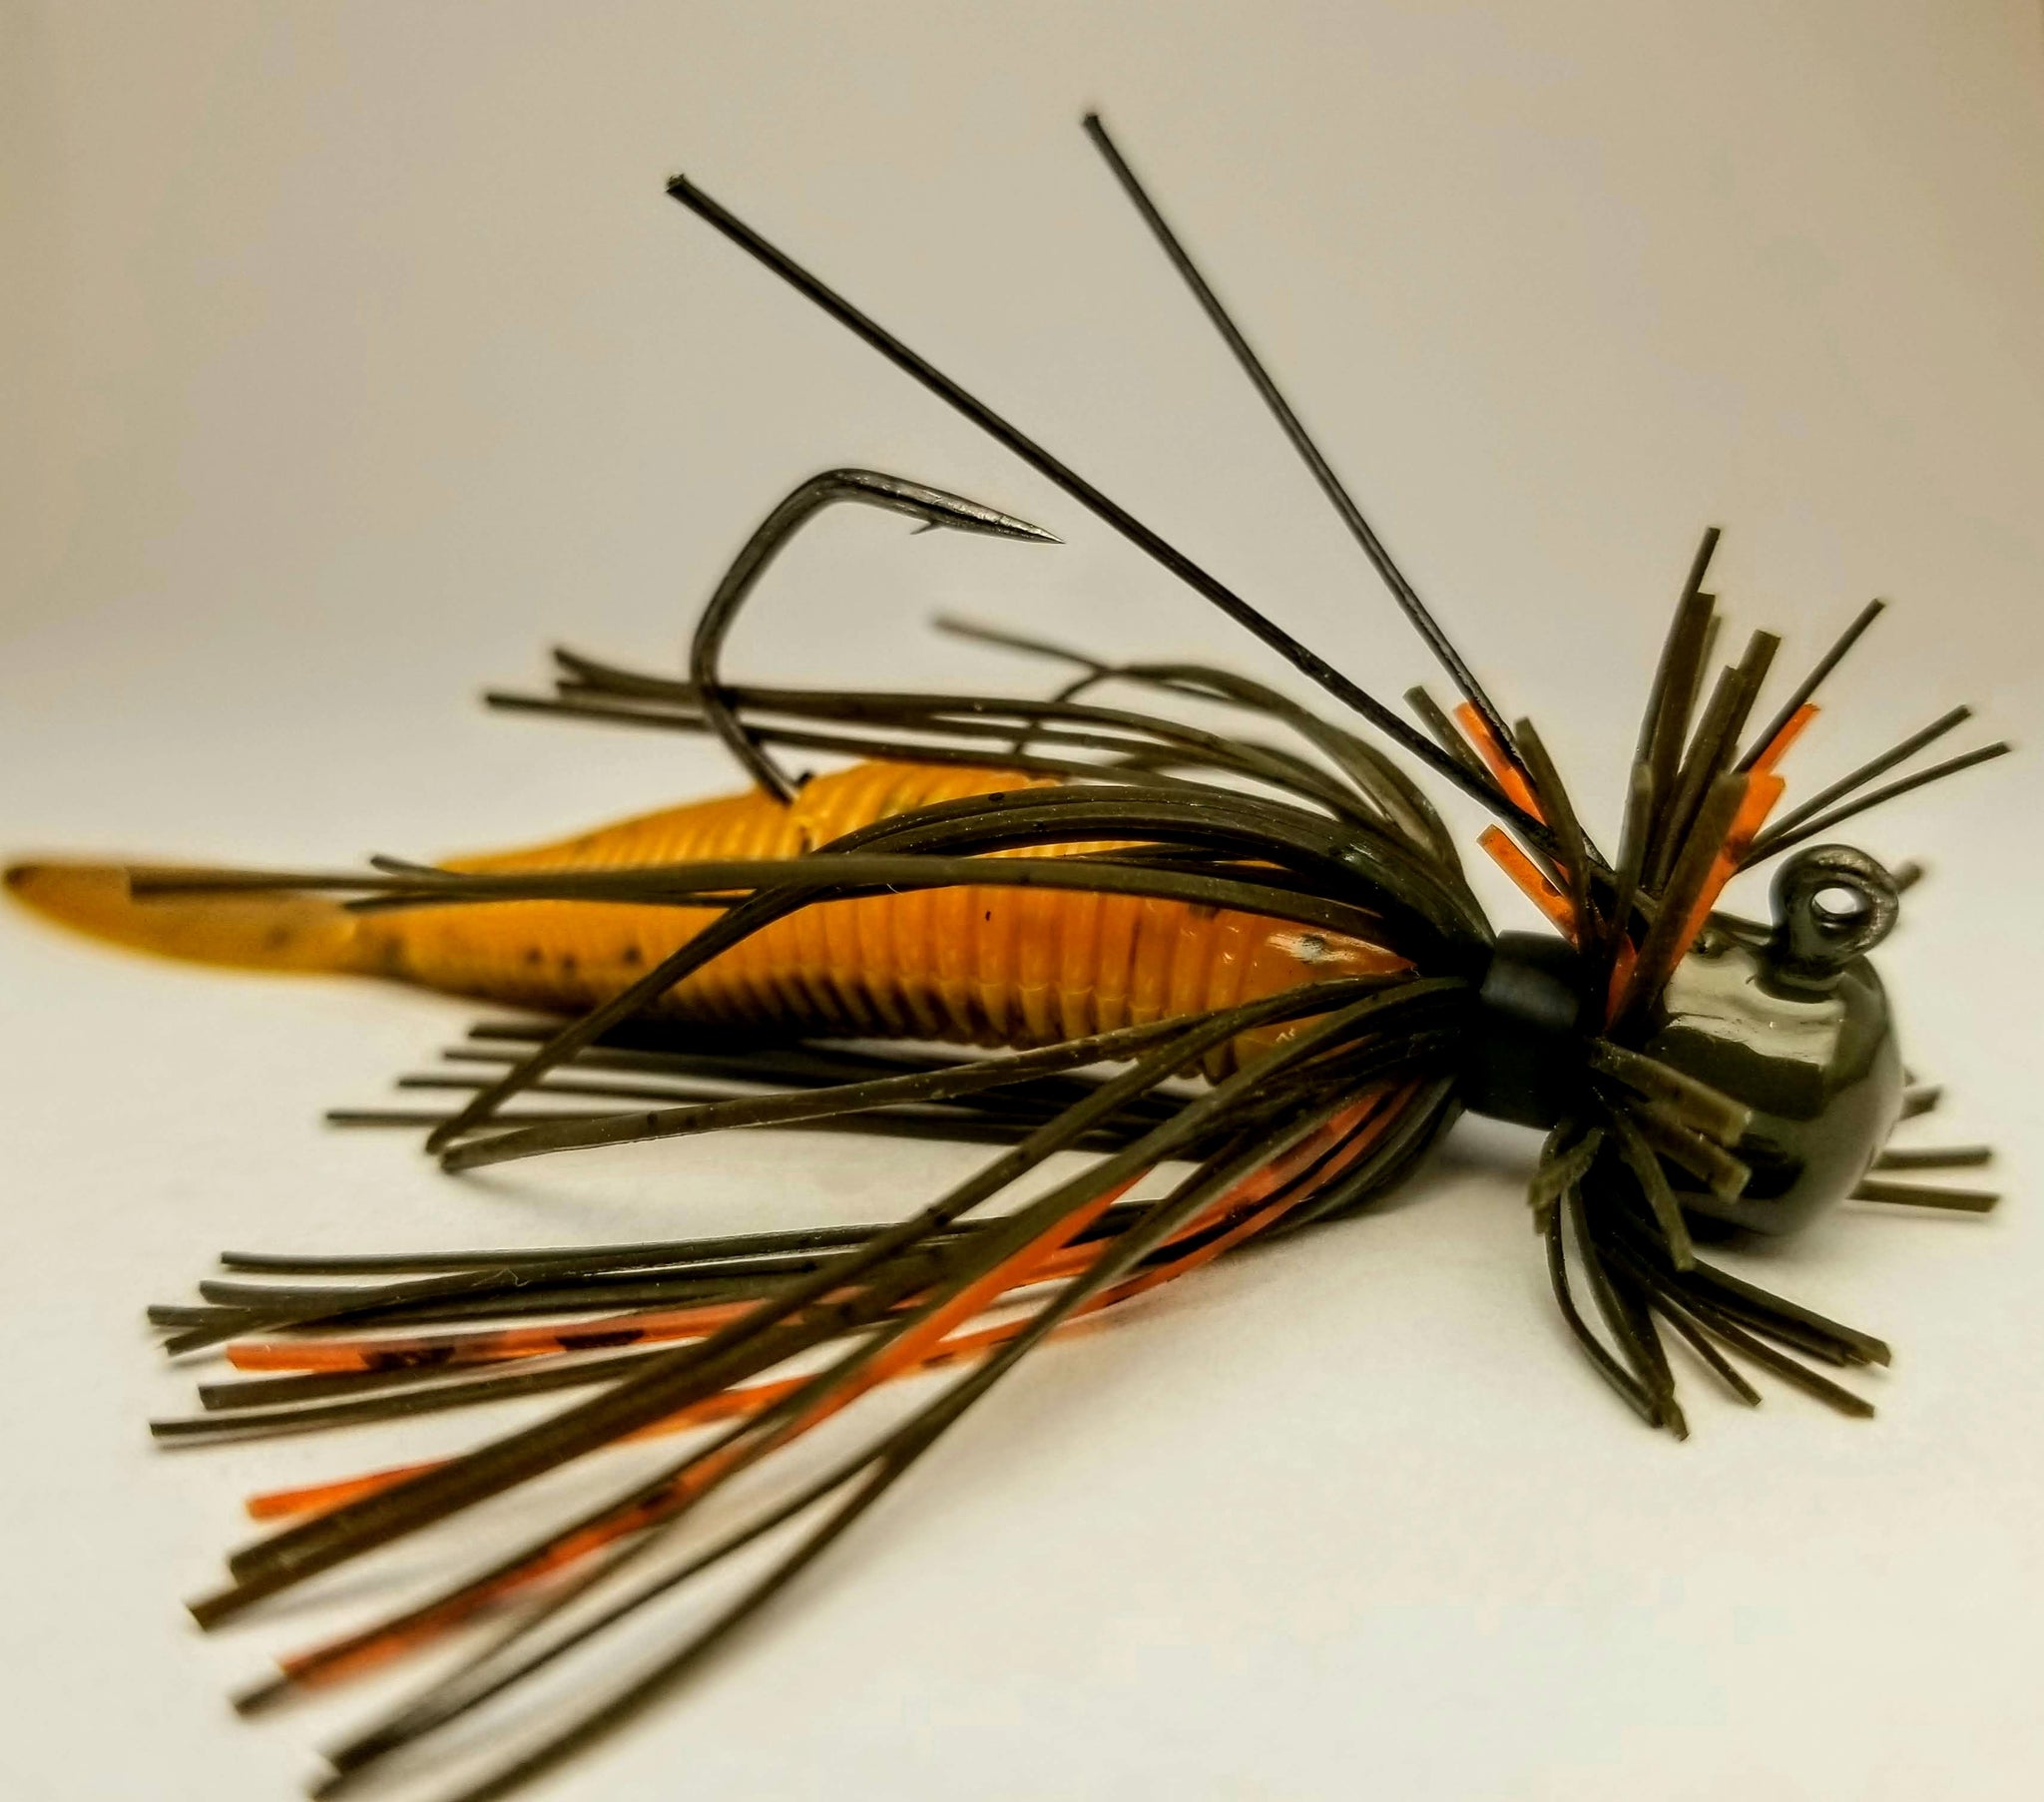 Skirted Finesse Jig 1/4 oz. Standard 90 Degree Hook Size 3/0 Several Colors  Available - Jade's Jigs - Lead-Free Tackle